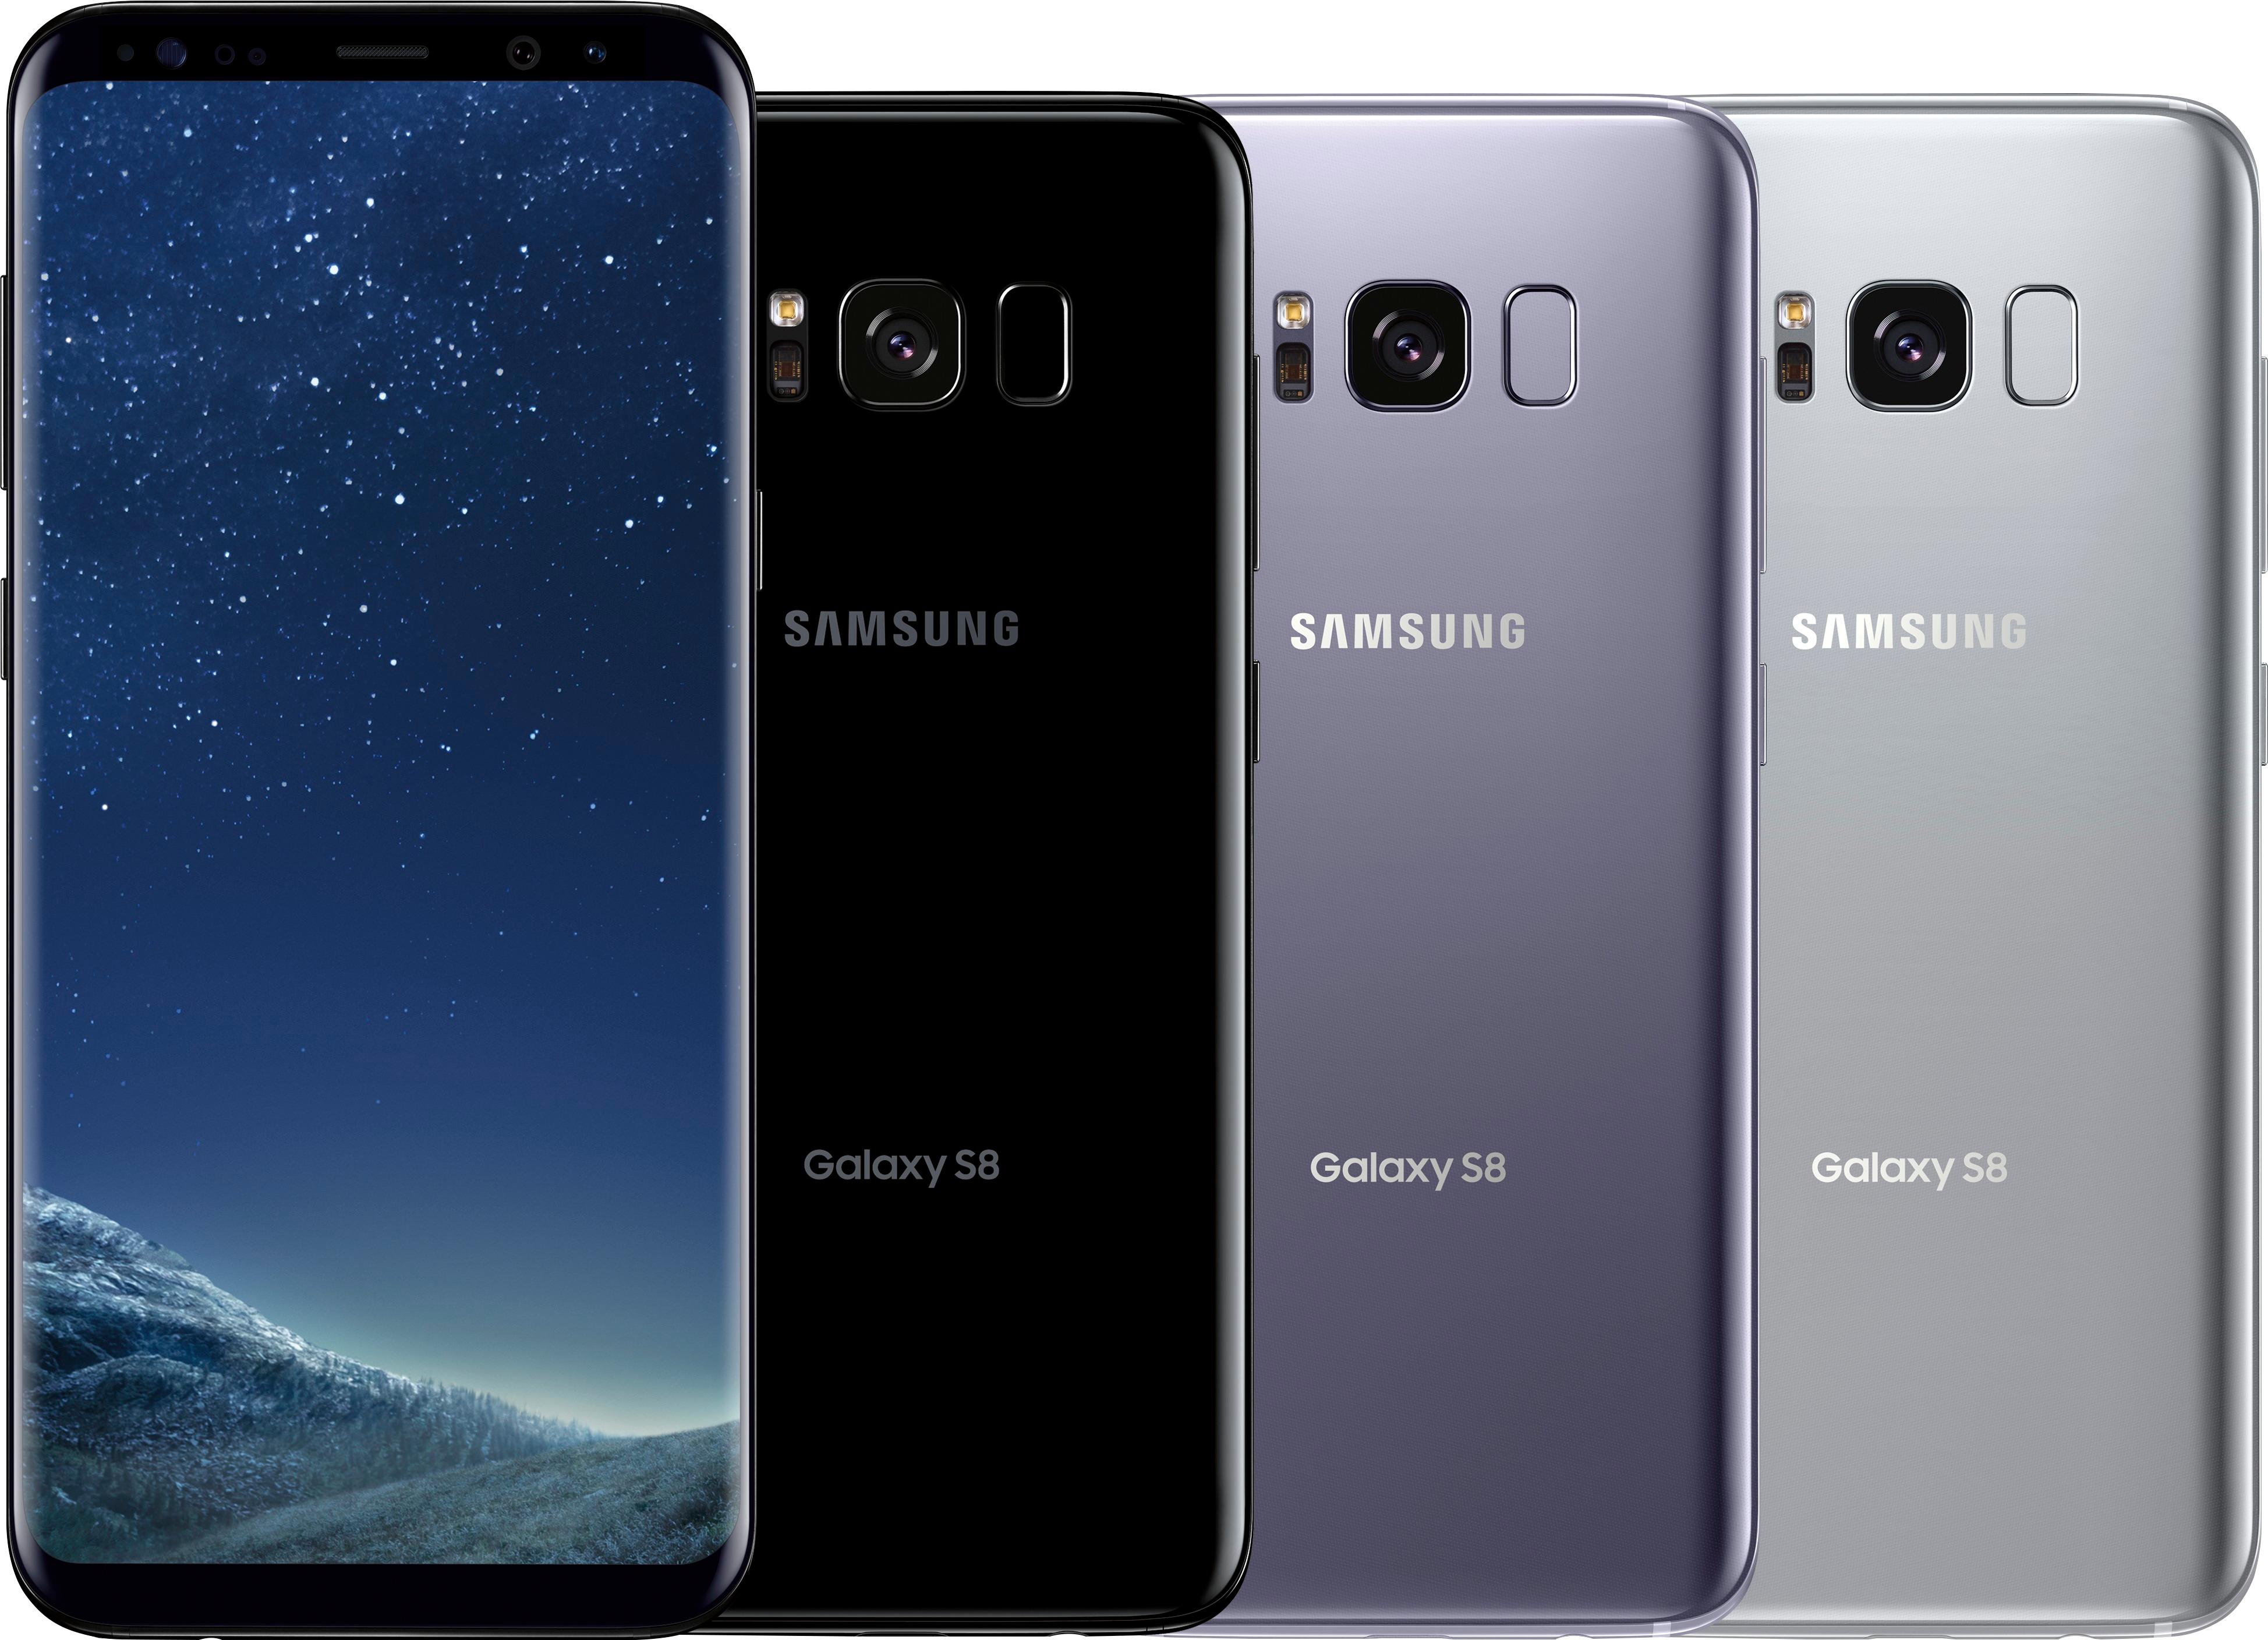 Samsung Galaxy S8 updated with Android Oreo 8.0